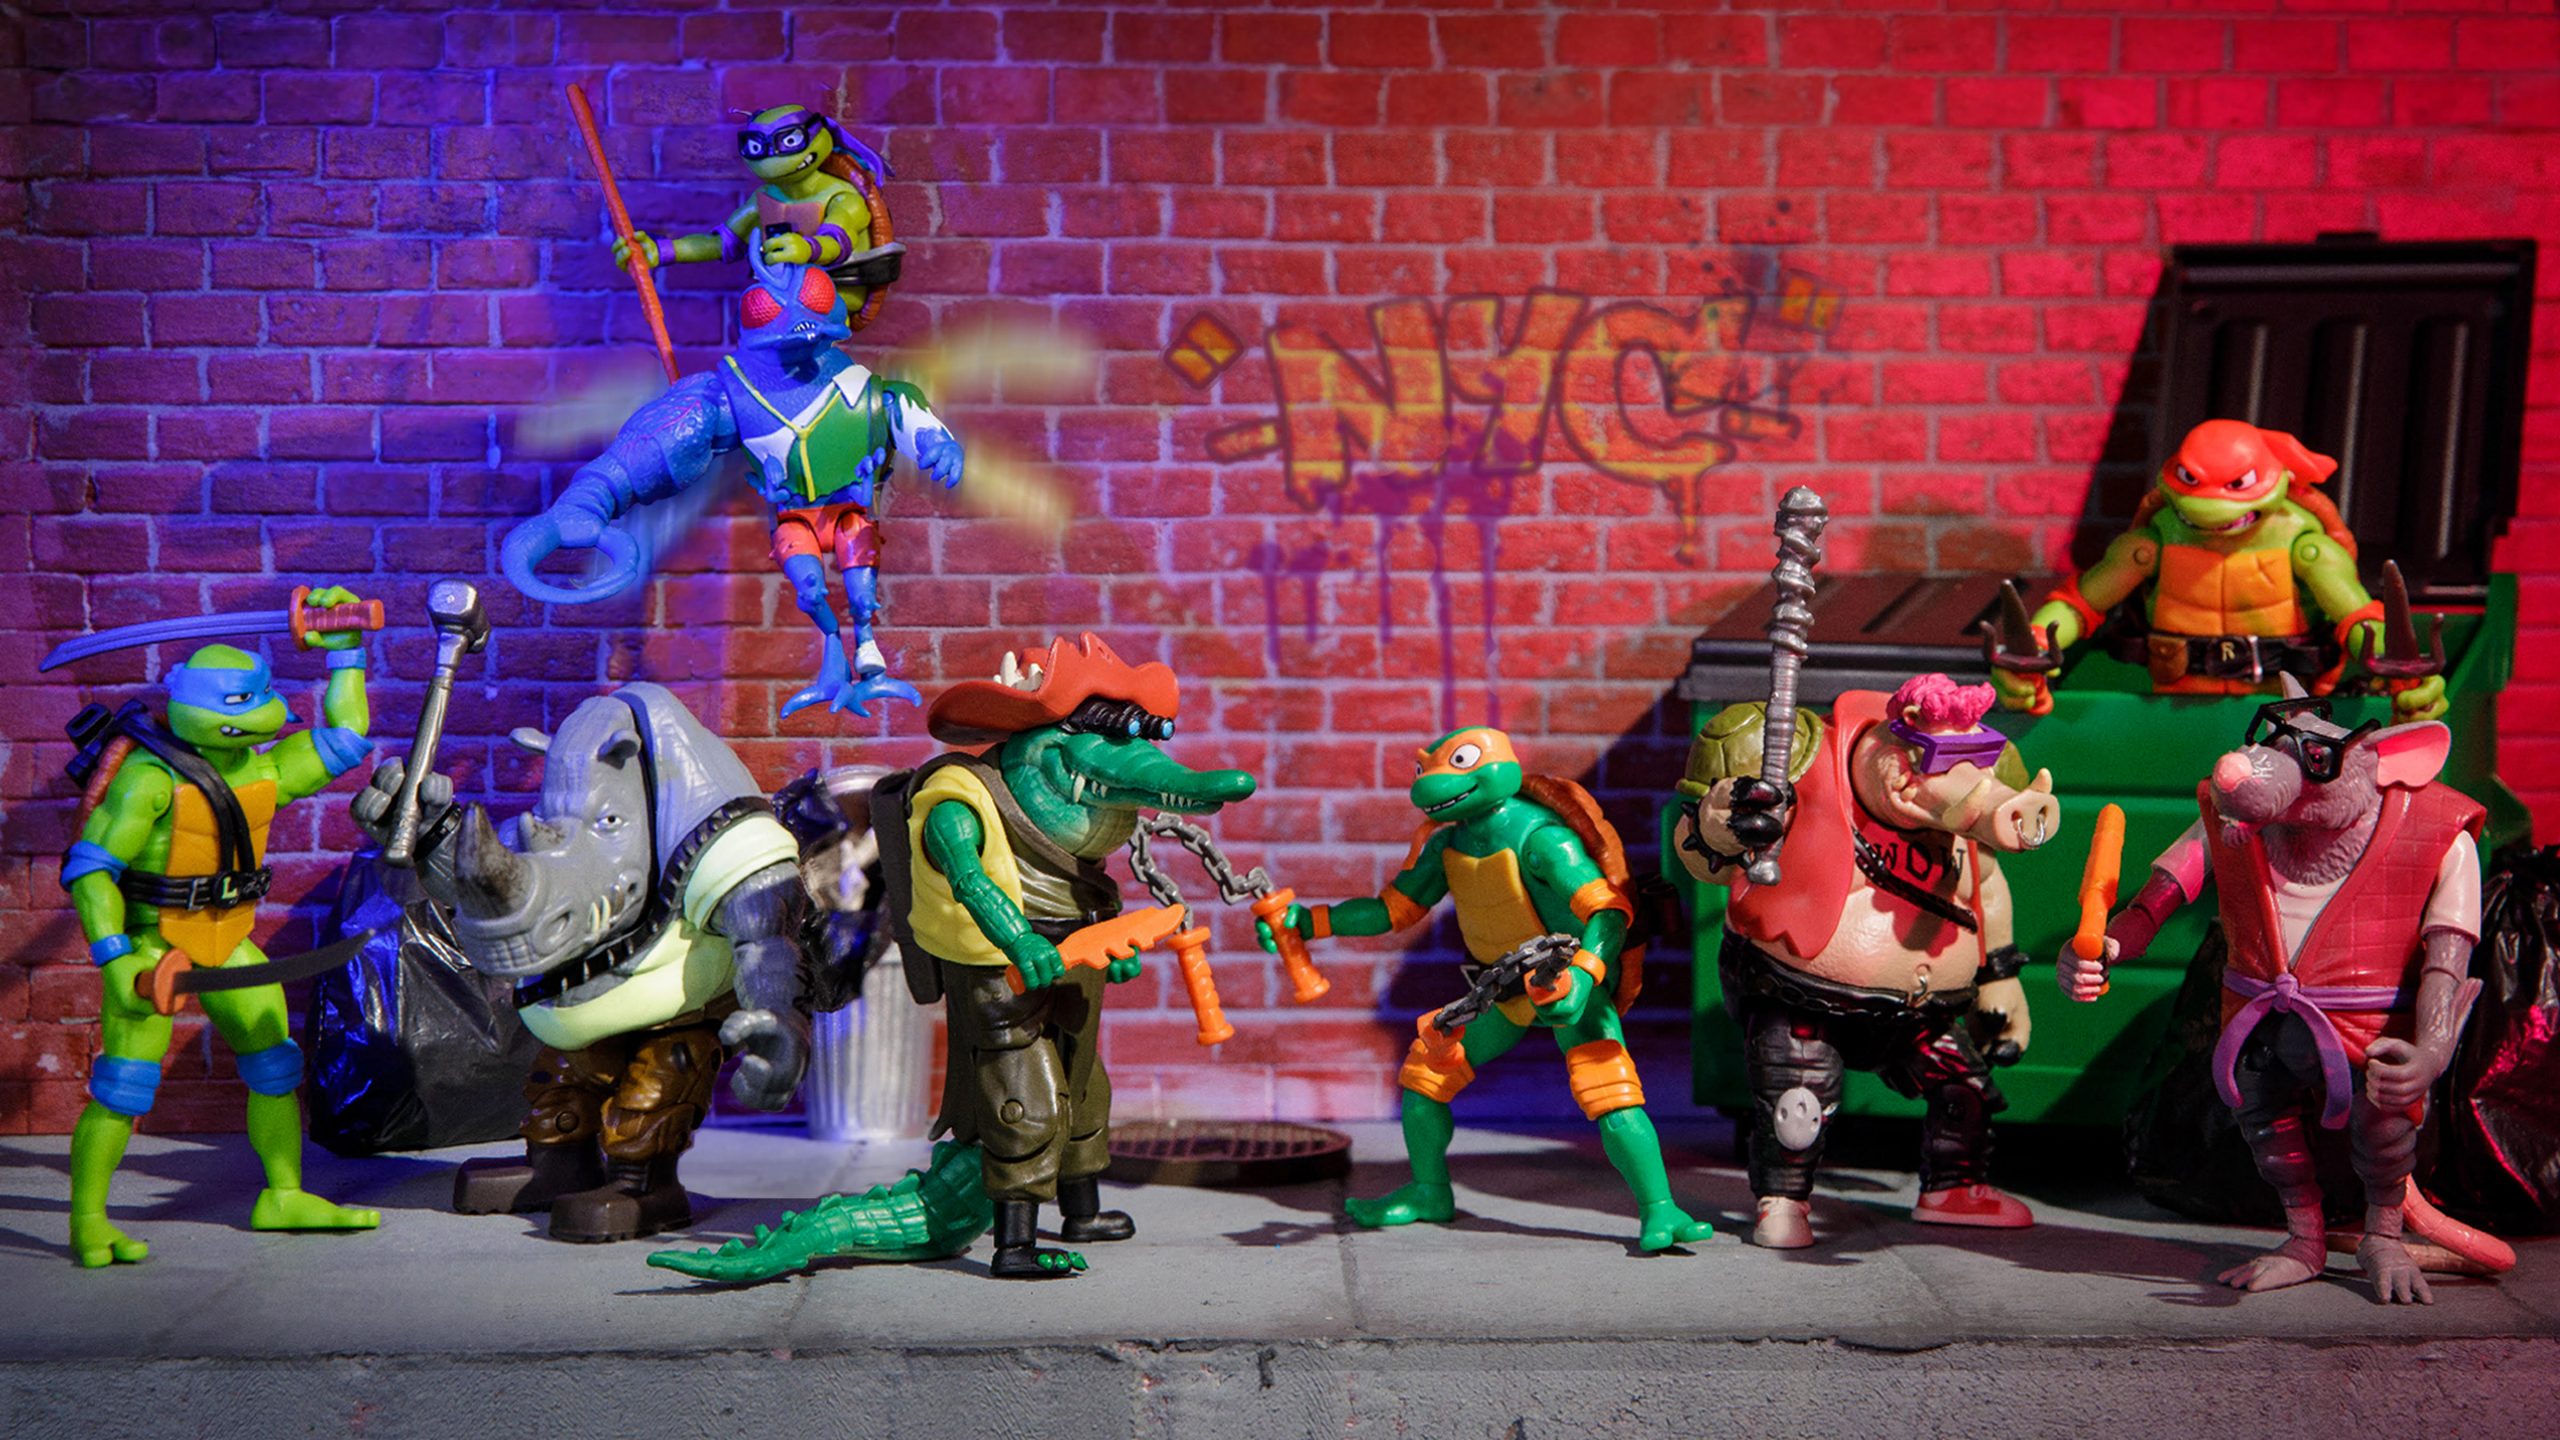 PLAYMATES TOYS REVEALS THE NEW VILLAINS AND MUTANTS BASED ON TEENAGE